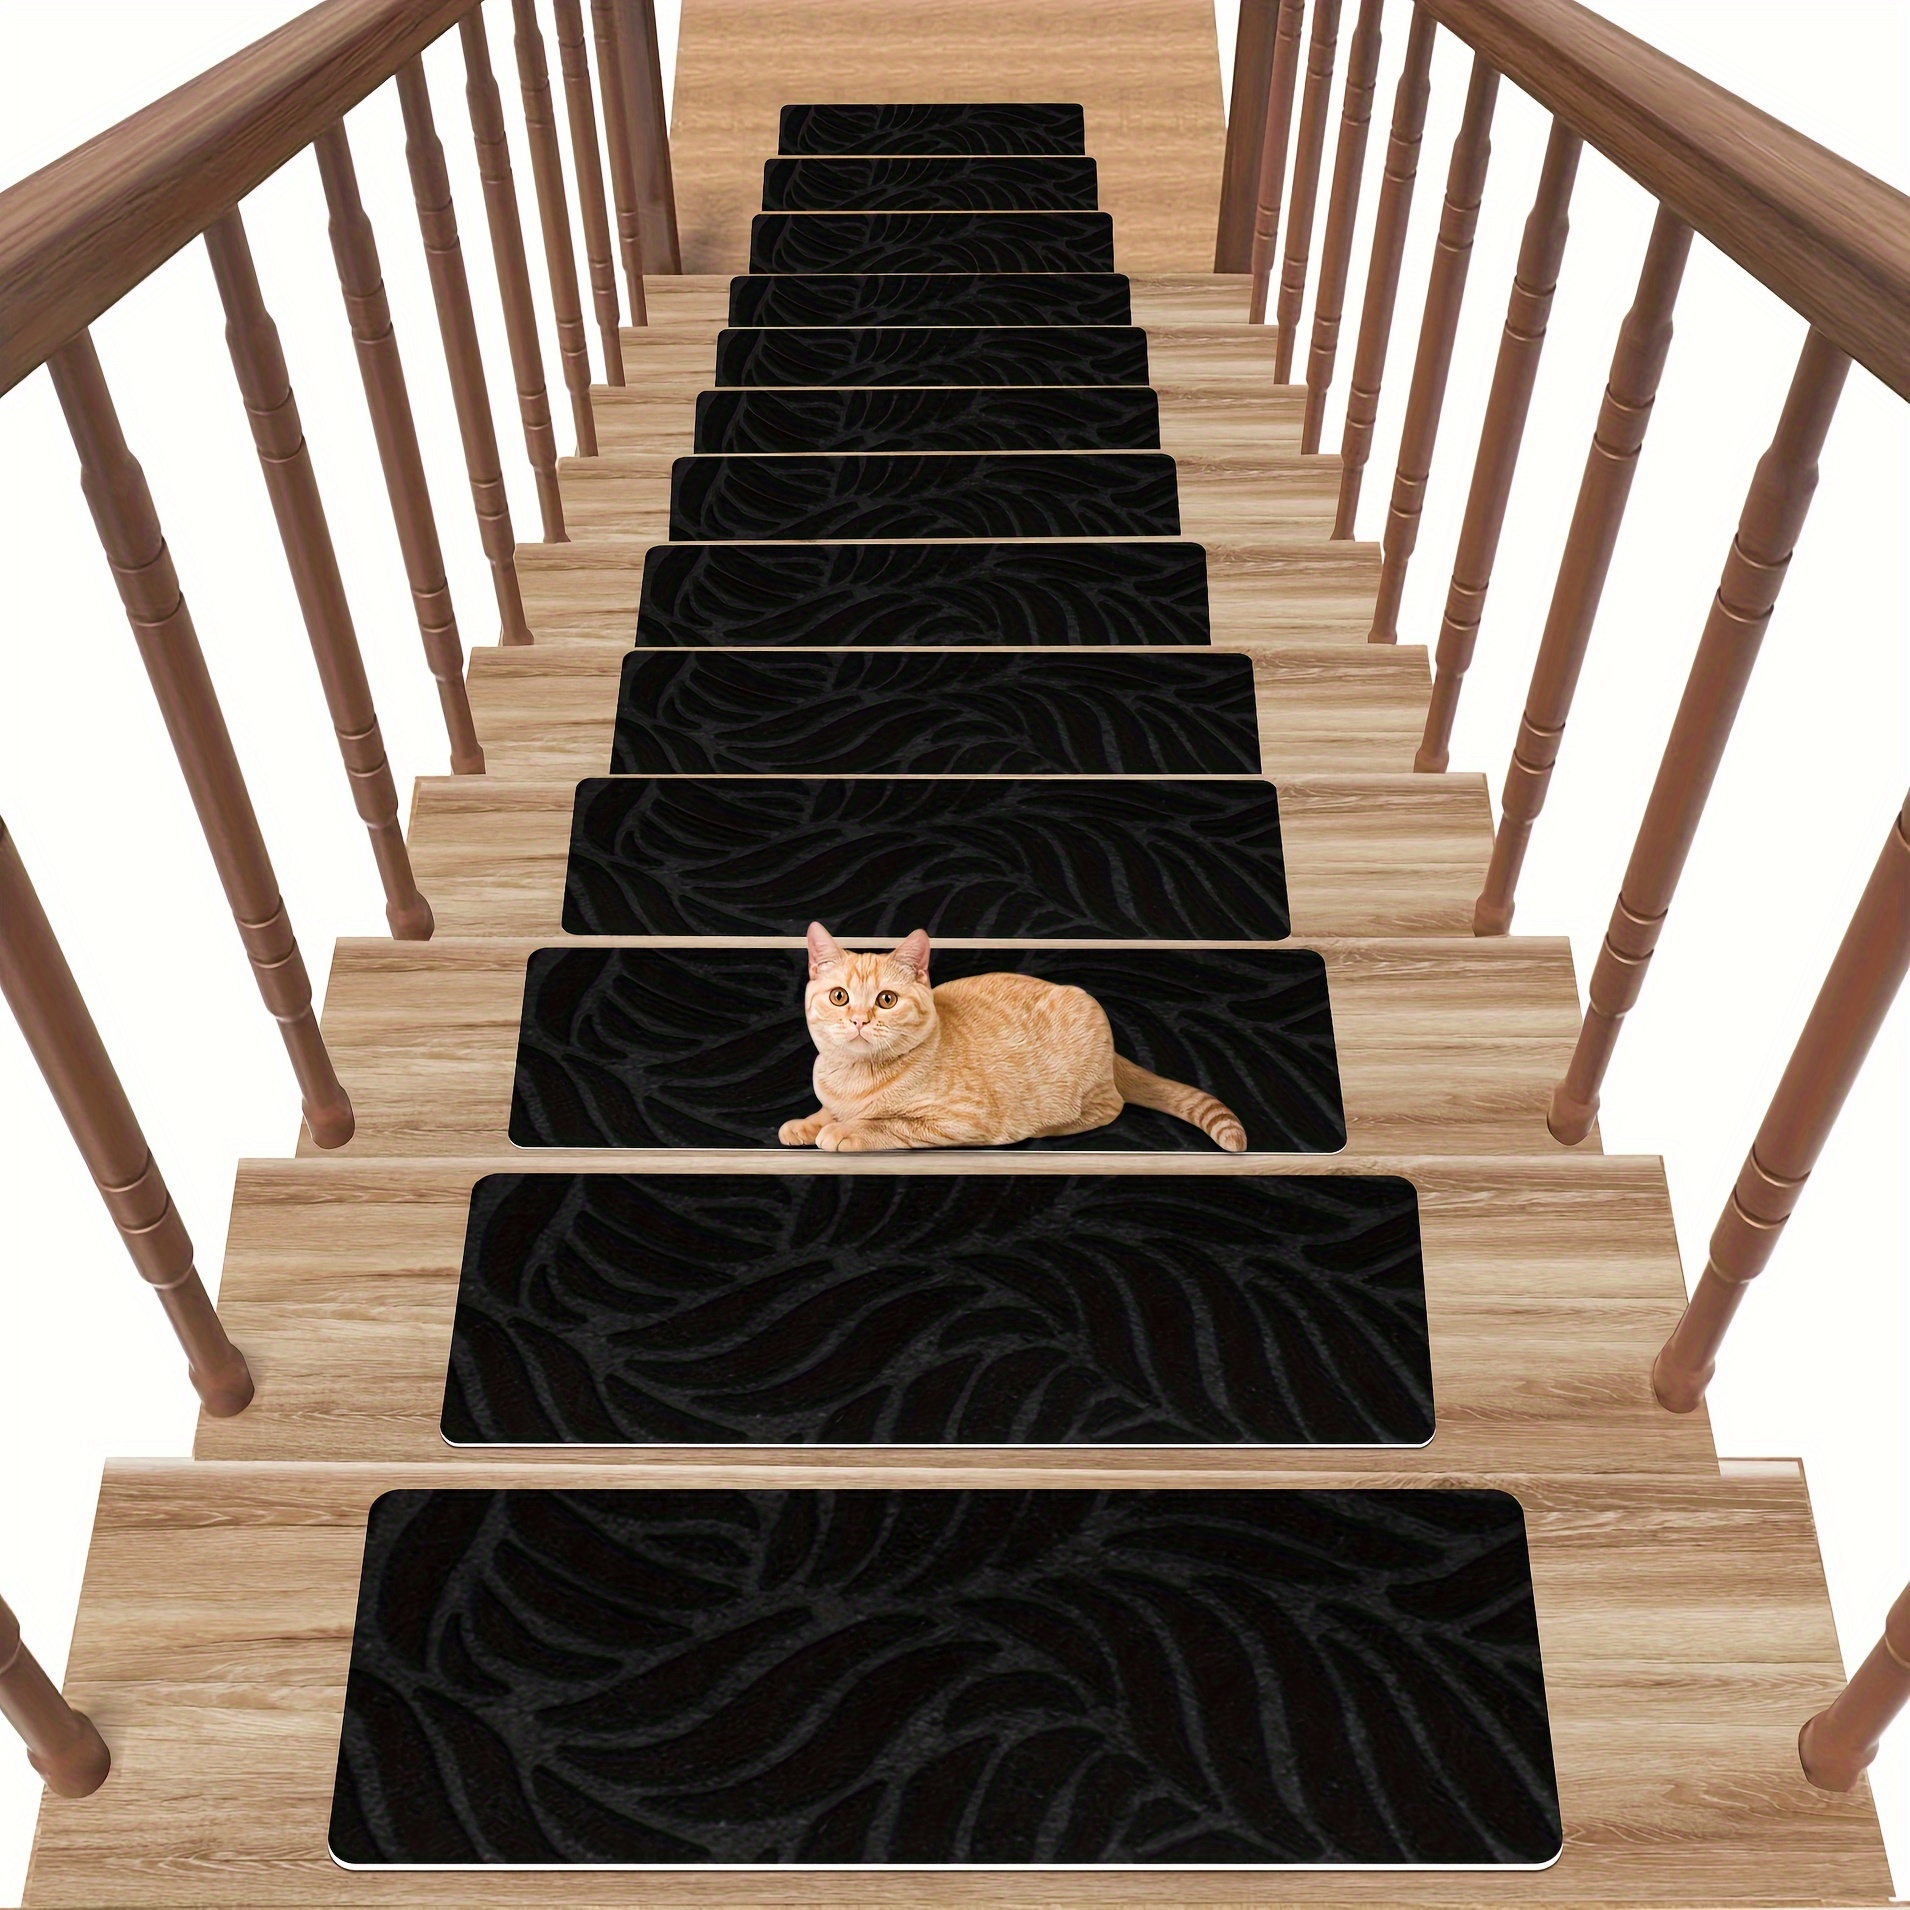 

7/15pccs Anti-skid Stair Treads, Non-slip Indoor Stair Carpets, Rugs For Wooden Steps, For Pets Elders, Self-adhesive Stair Runners For Home Use